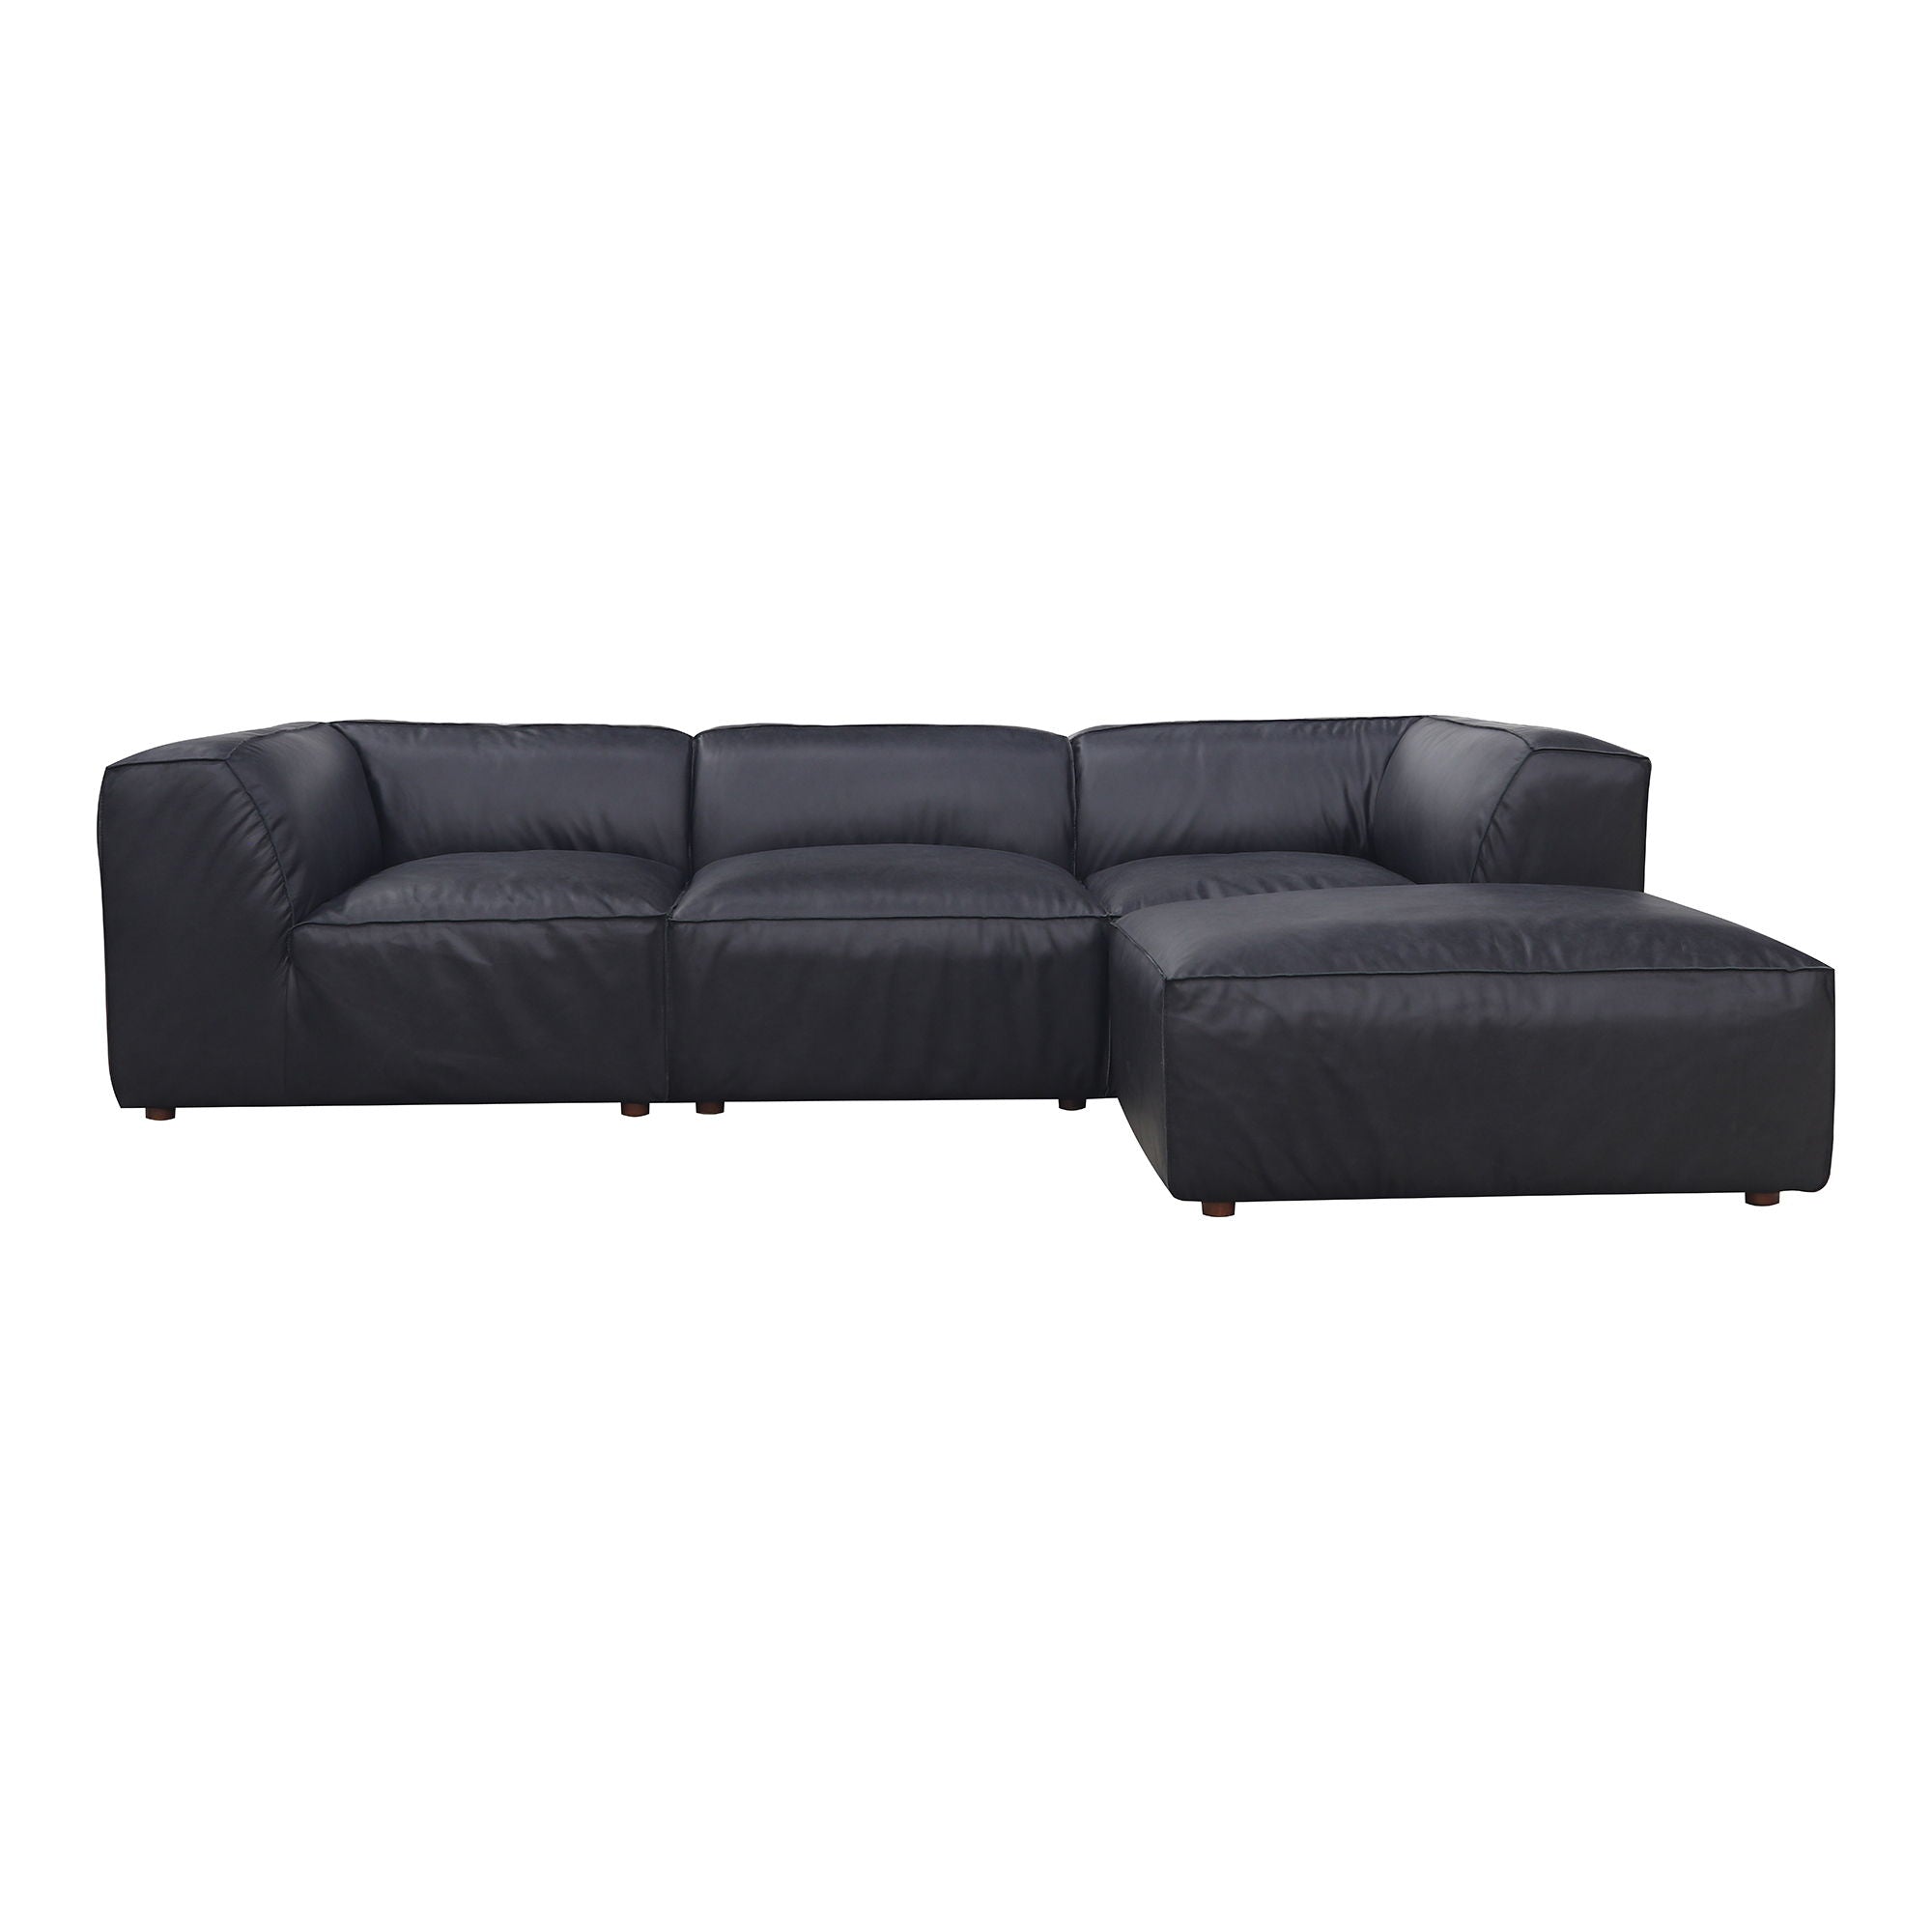 Black Leather Sectional - Modular, Cozy Form-Stationary Sectionals-American Furniture Outlet